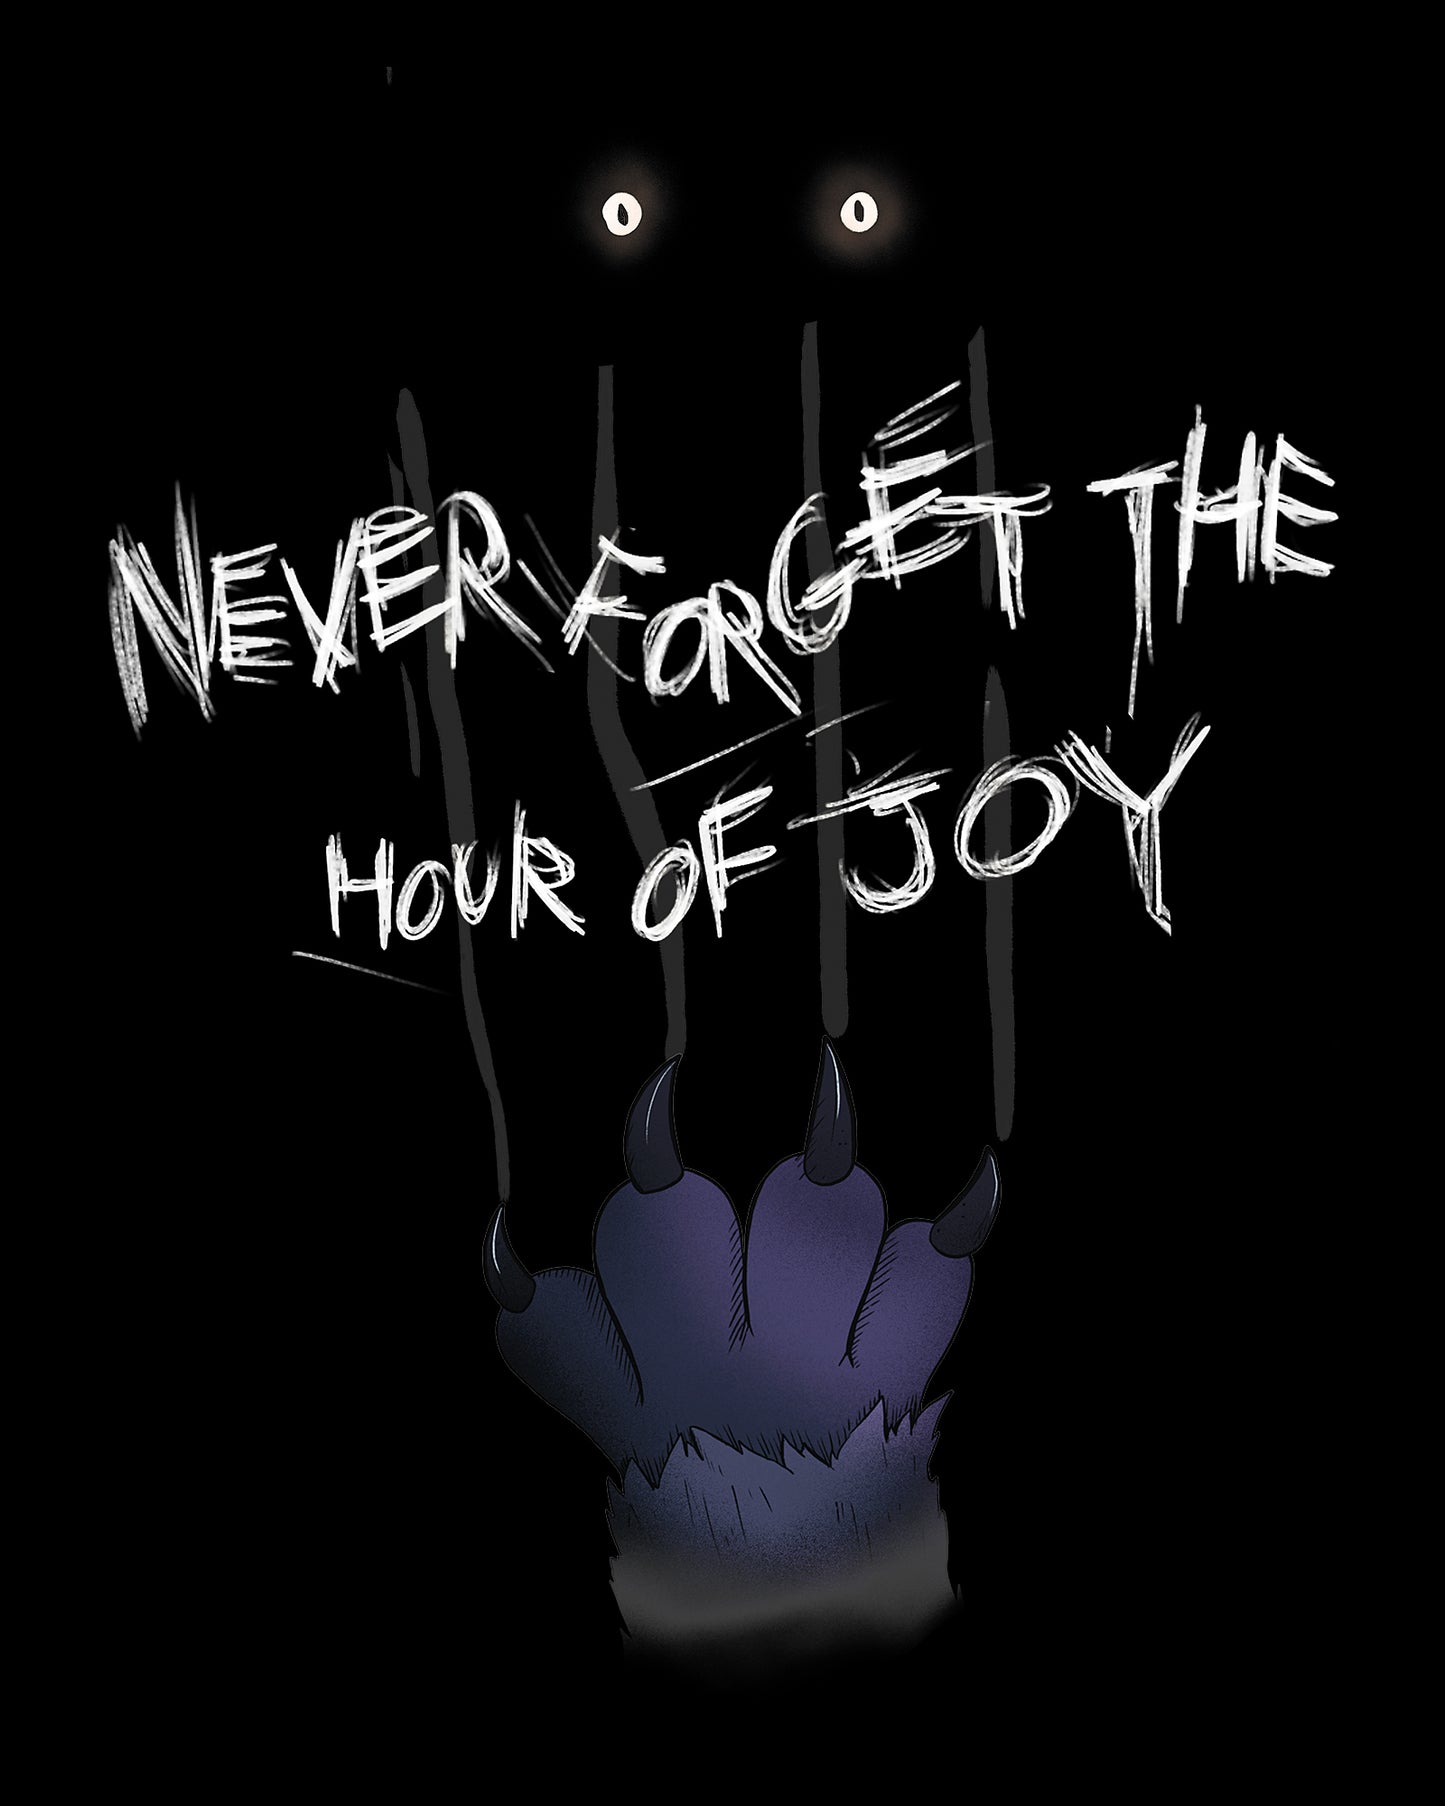 image on shirt: claw ripping down image. 2 glowing eyes. text: never forget the hour of joy